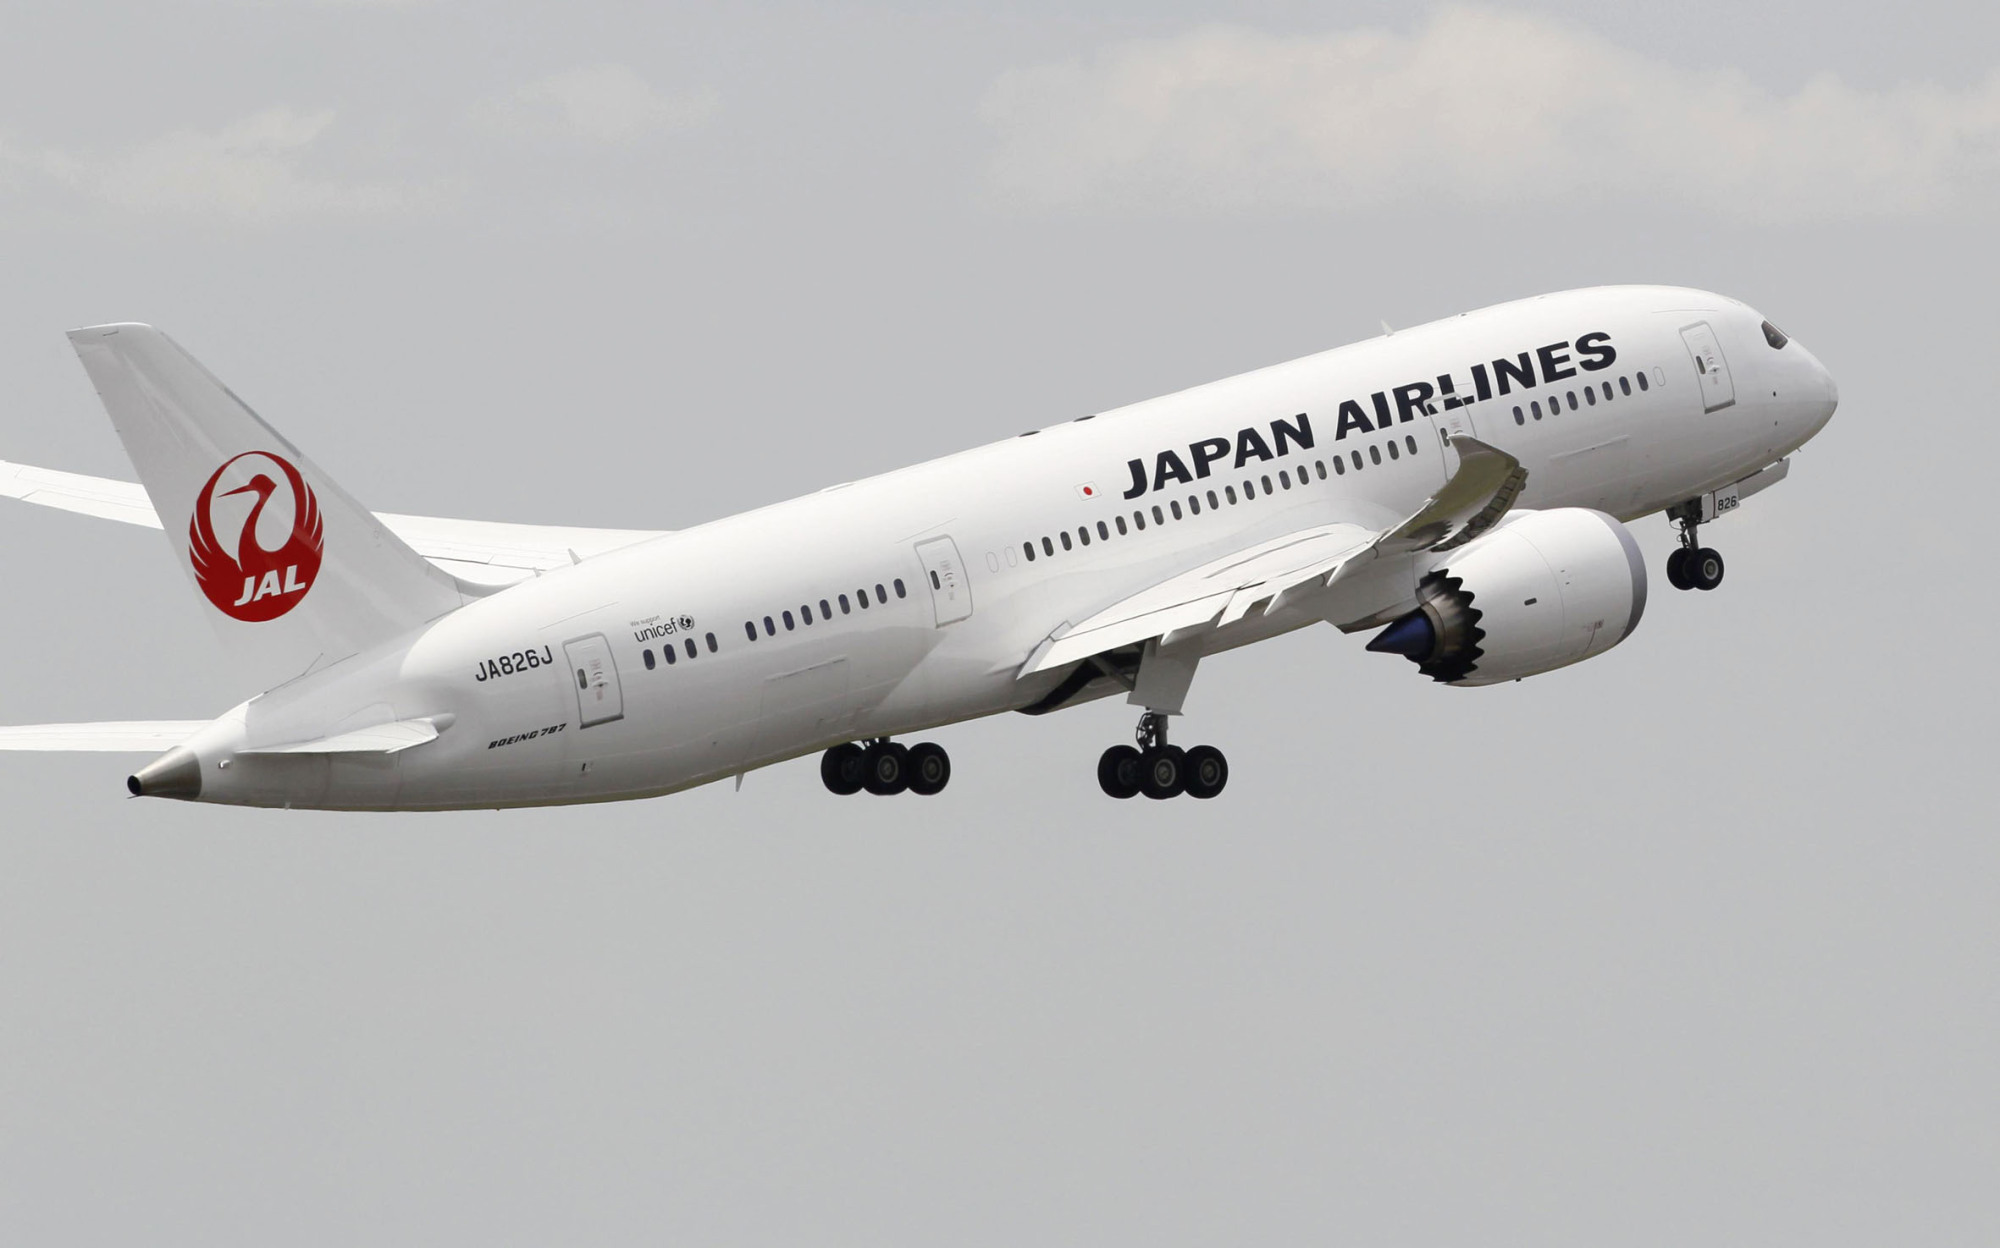 flather enlightenment moments - japan airlines - Japan Airlines 0 0 Jal unicef JA8263 Boeing 787